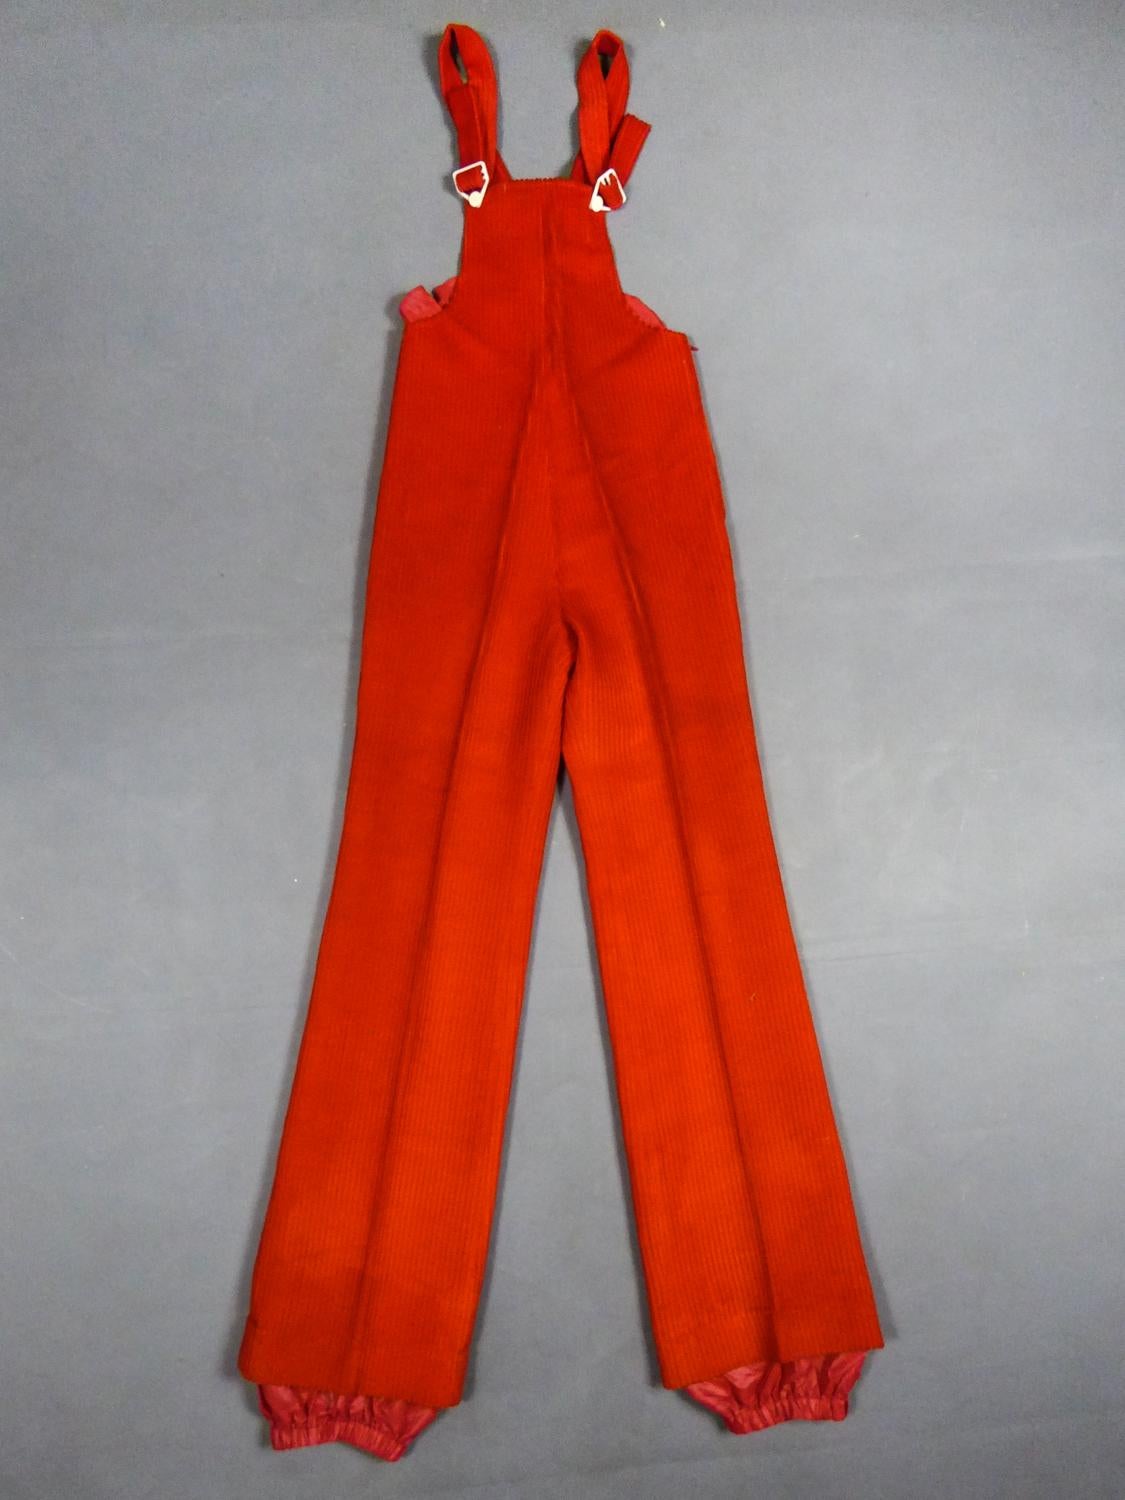 Circa 1975
France

Jumpsuit in vermilion red ribbed velvet from the Jantzen brand, dating from the 1970s. The Top tightened with white plastic buttons and straps with loops. Skin-tight cut with flared pants whose folds remain well marked. Closure on